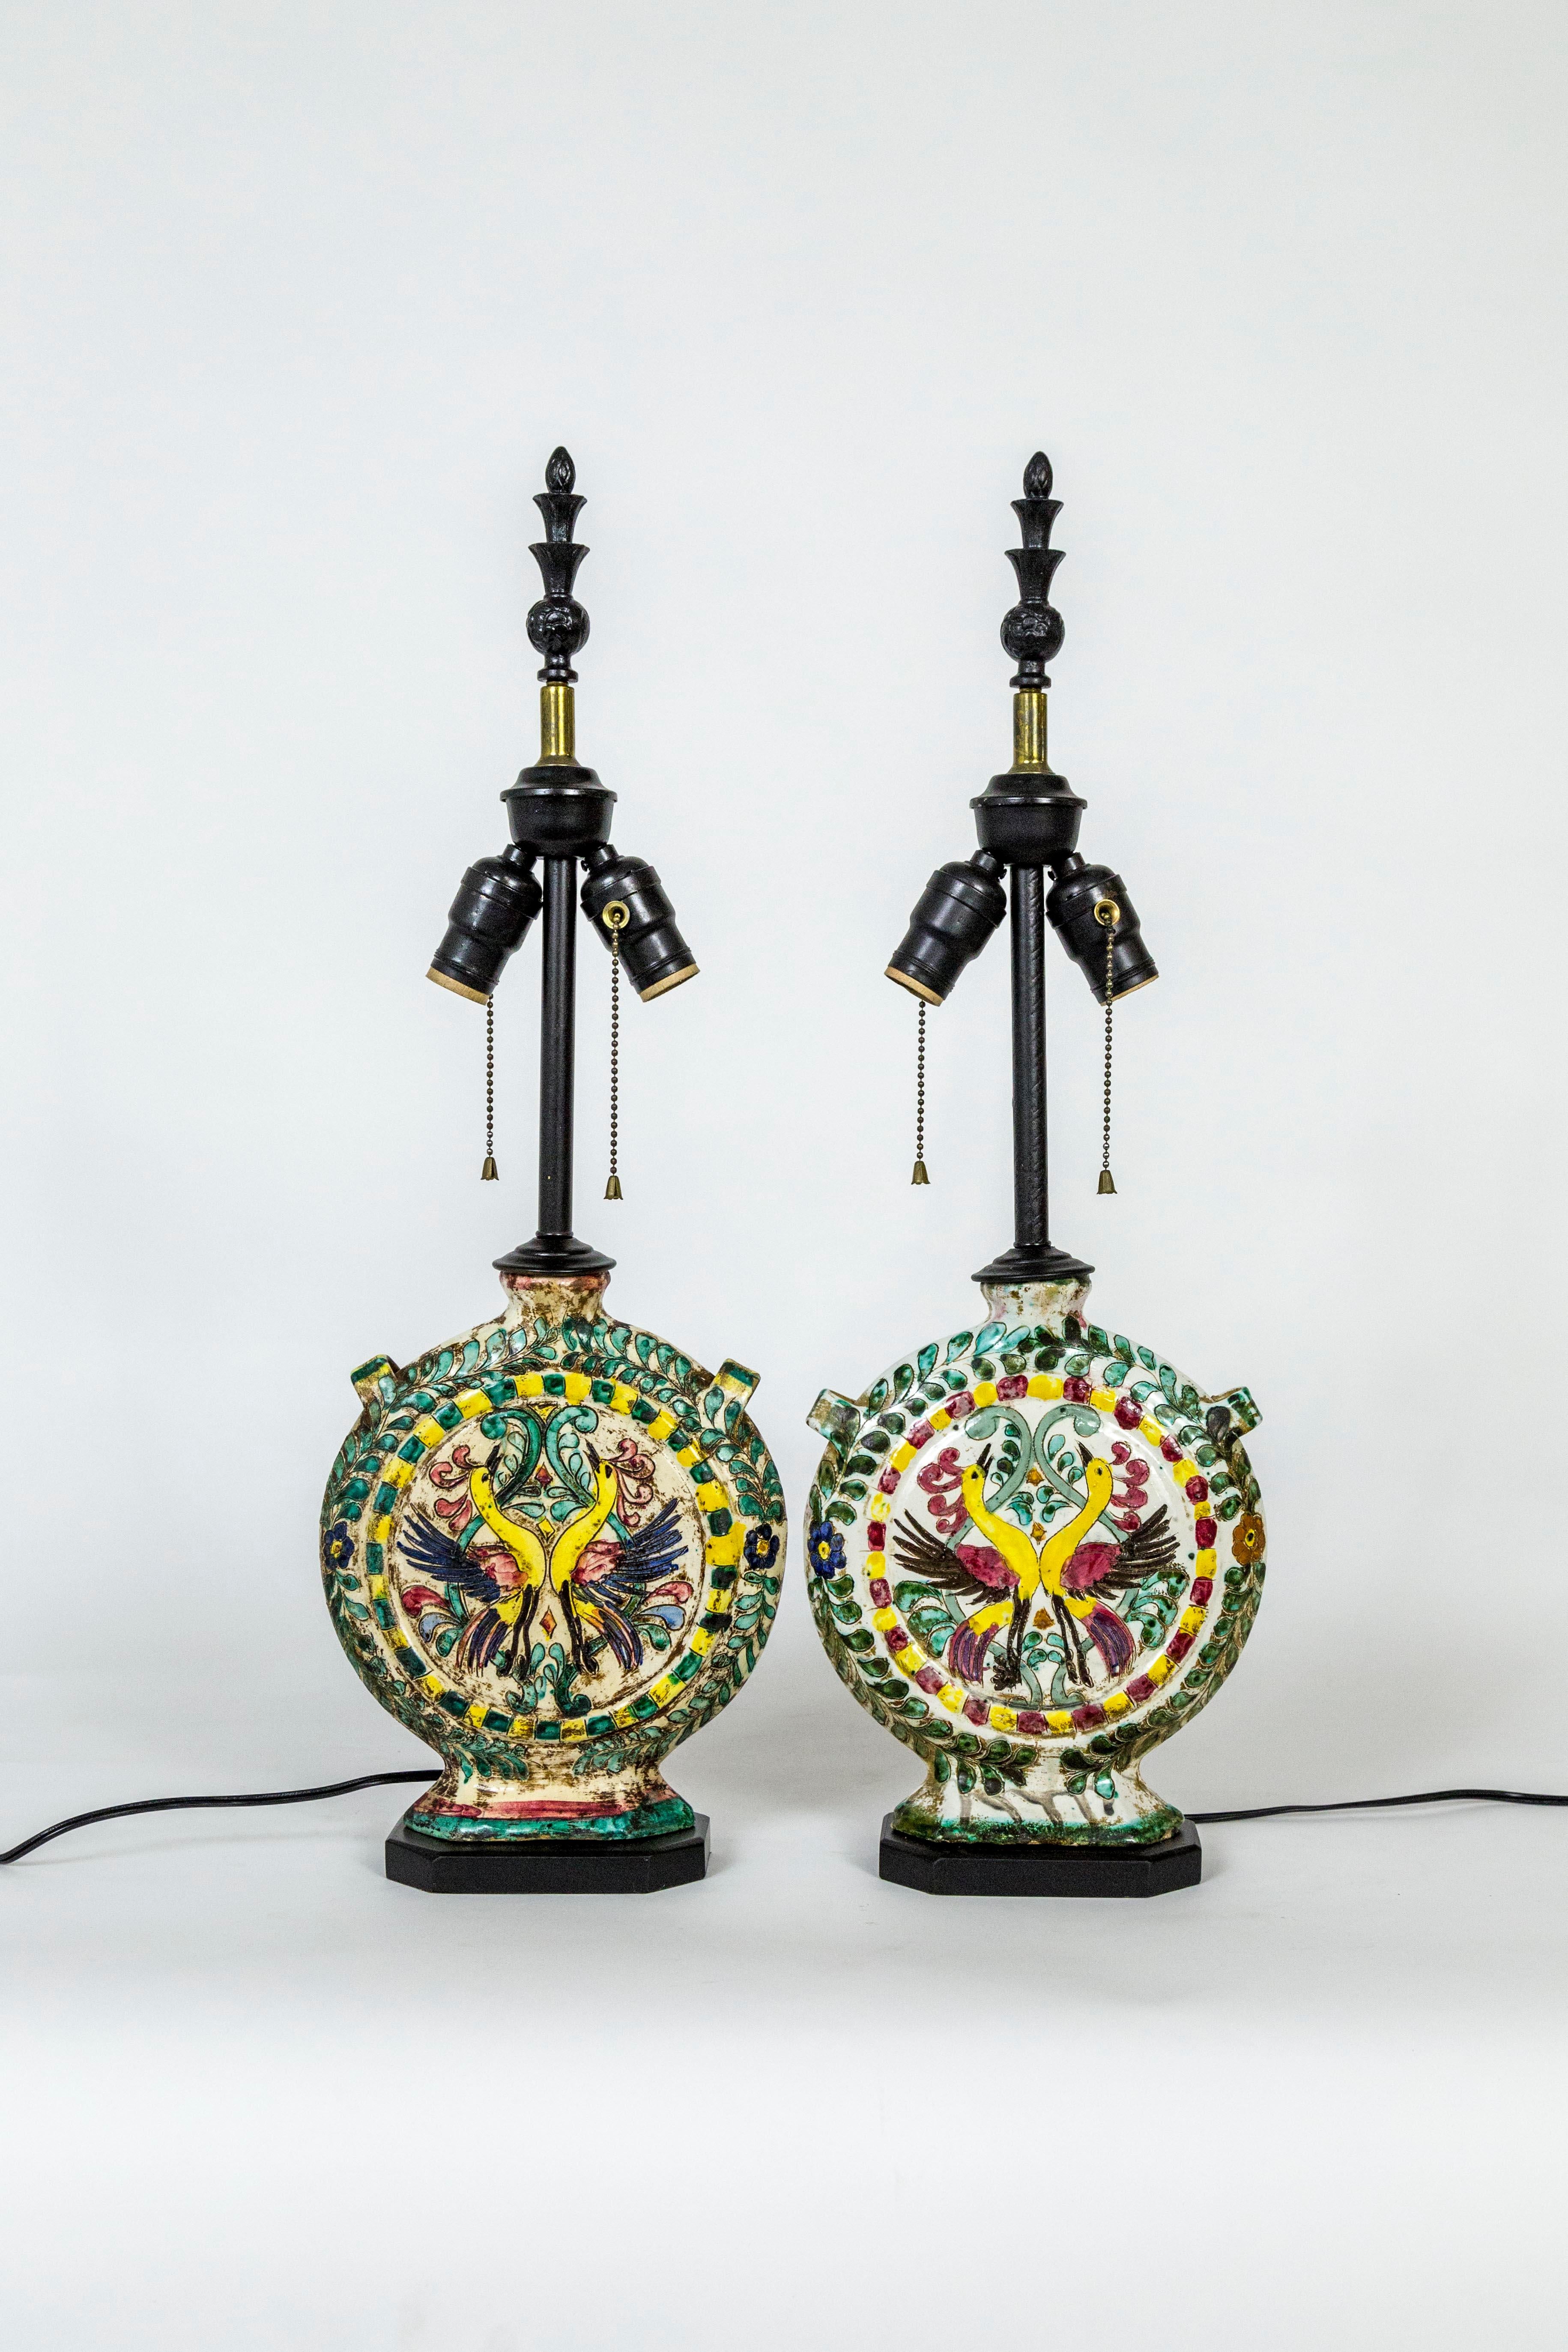 Narrow, ceramic wine canteens with painted birds, primarily yellow, green, and white in color, as rustic table lamps. Italian, Majolica tradition, Folk Art, circa 1900. On black, wood base, with black, metal finials; 2 sockets. Newly wired.